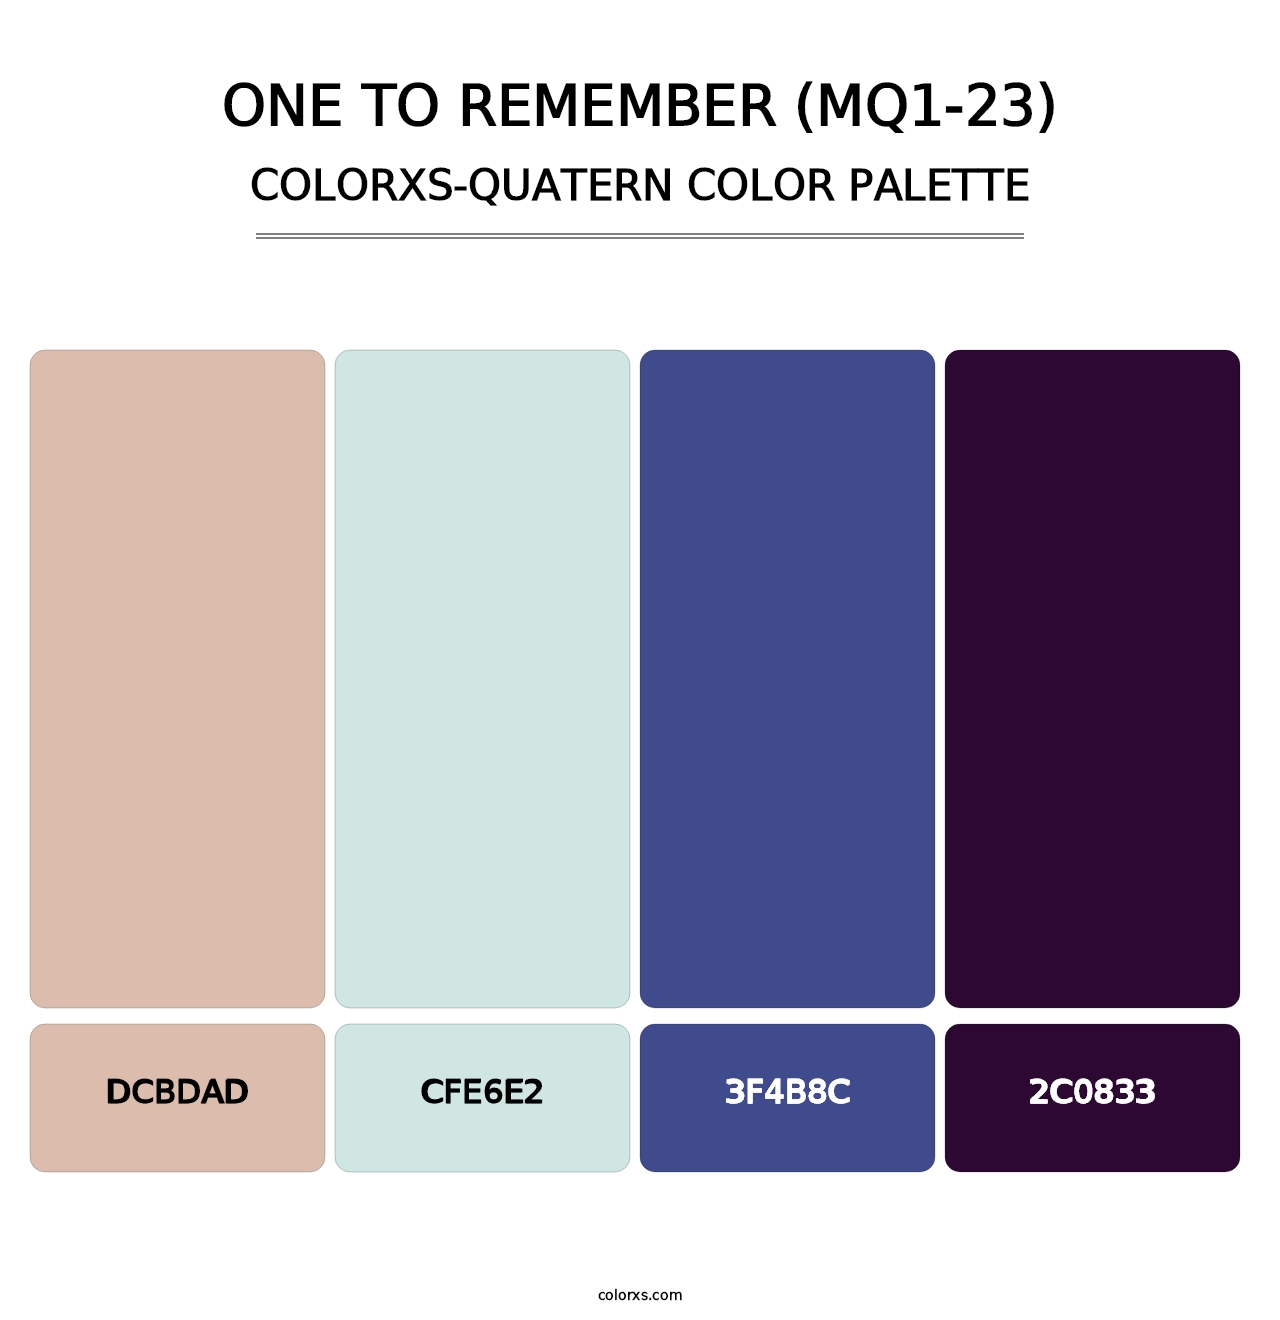 One To Remember (MQ1-23) - Colorxs Quatern Palette